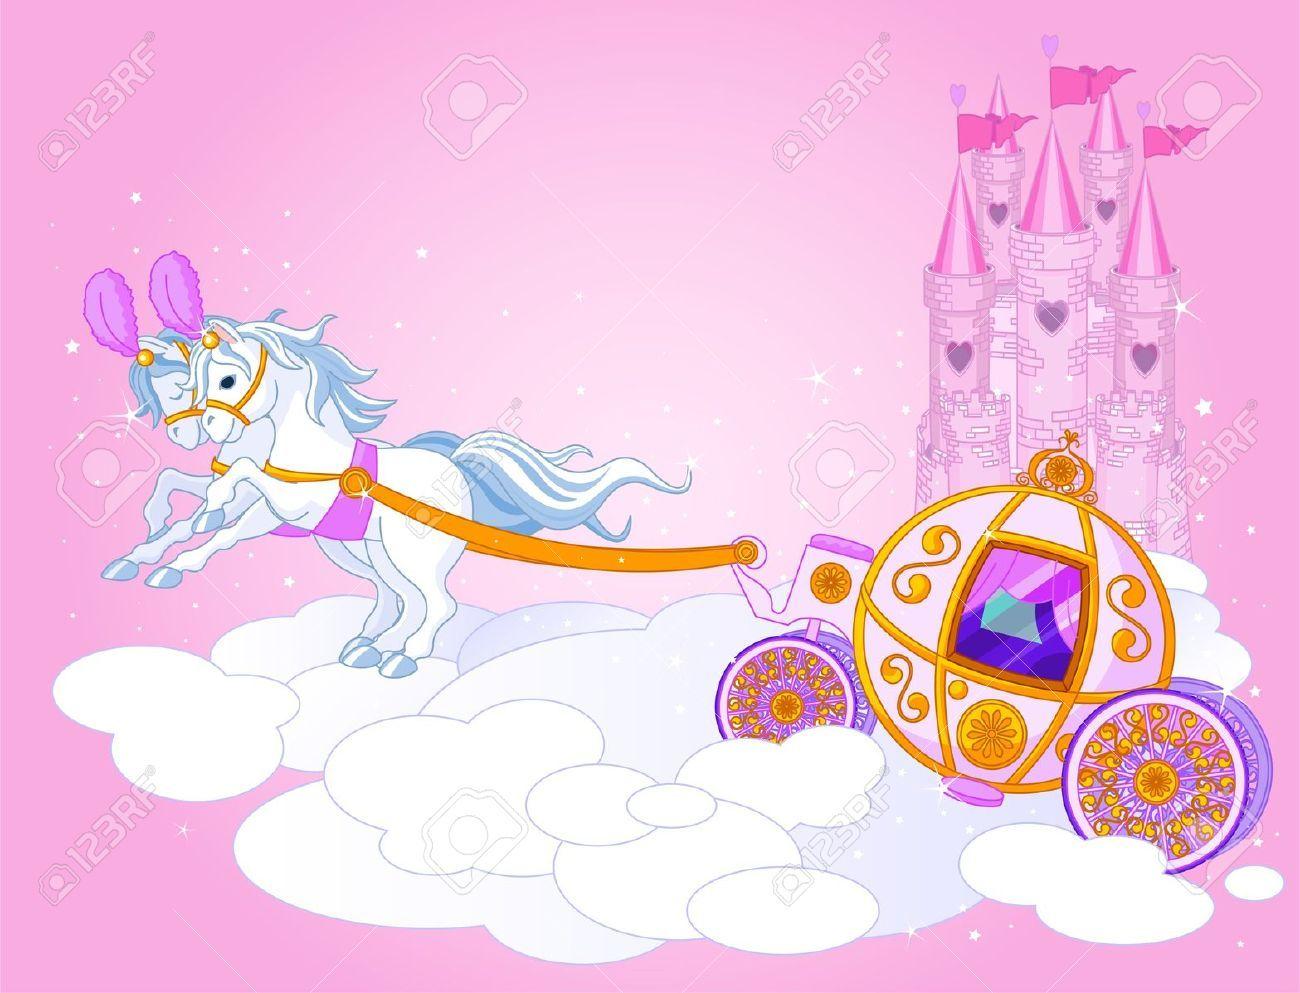 princess castle background pink 2. Background Check All